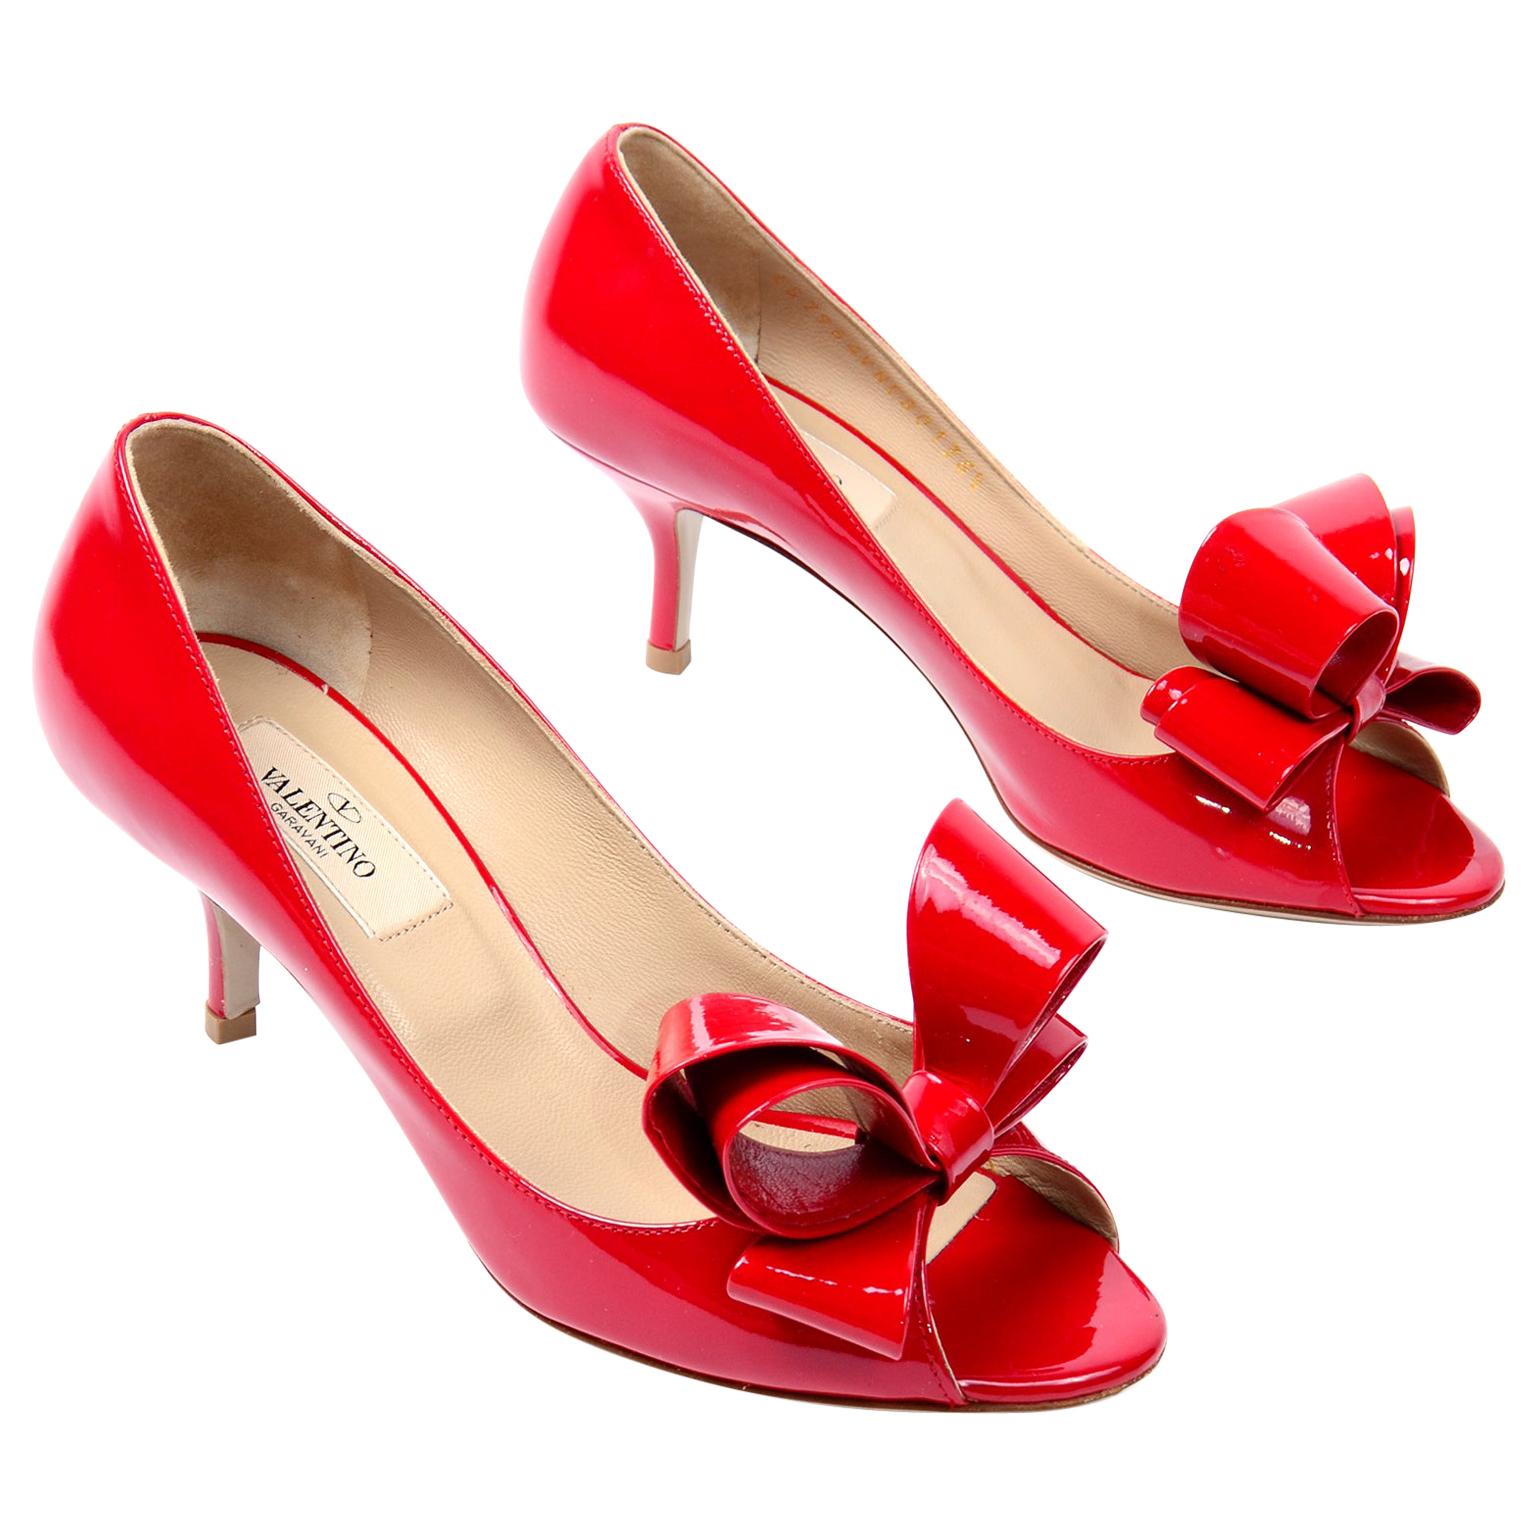 Valentino Garavani Red Leather Bow Shoes With 2.5" Heels